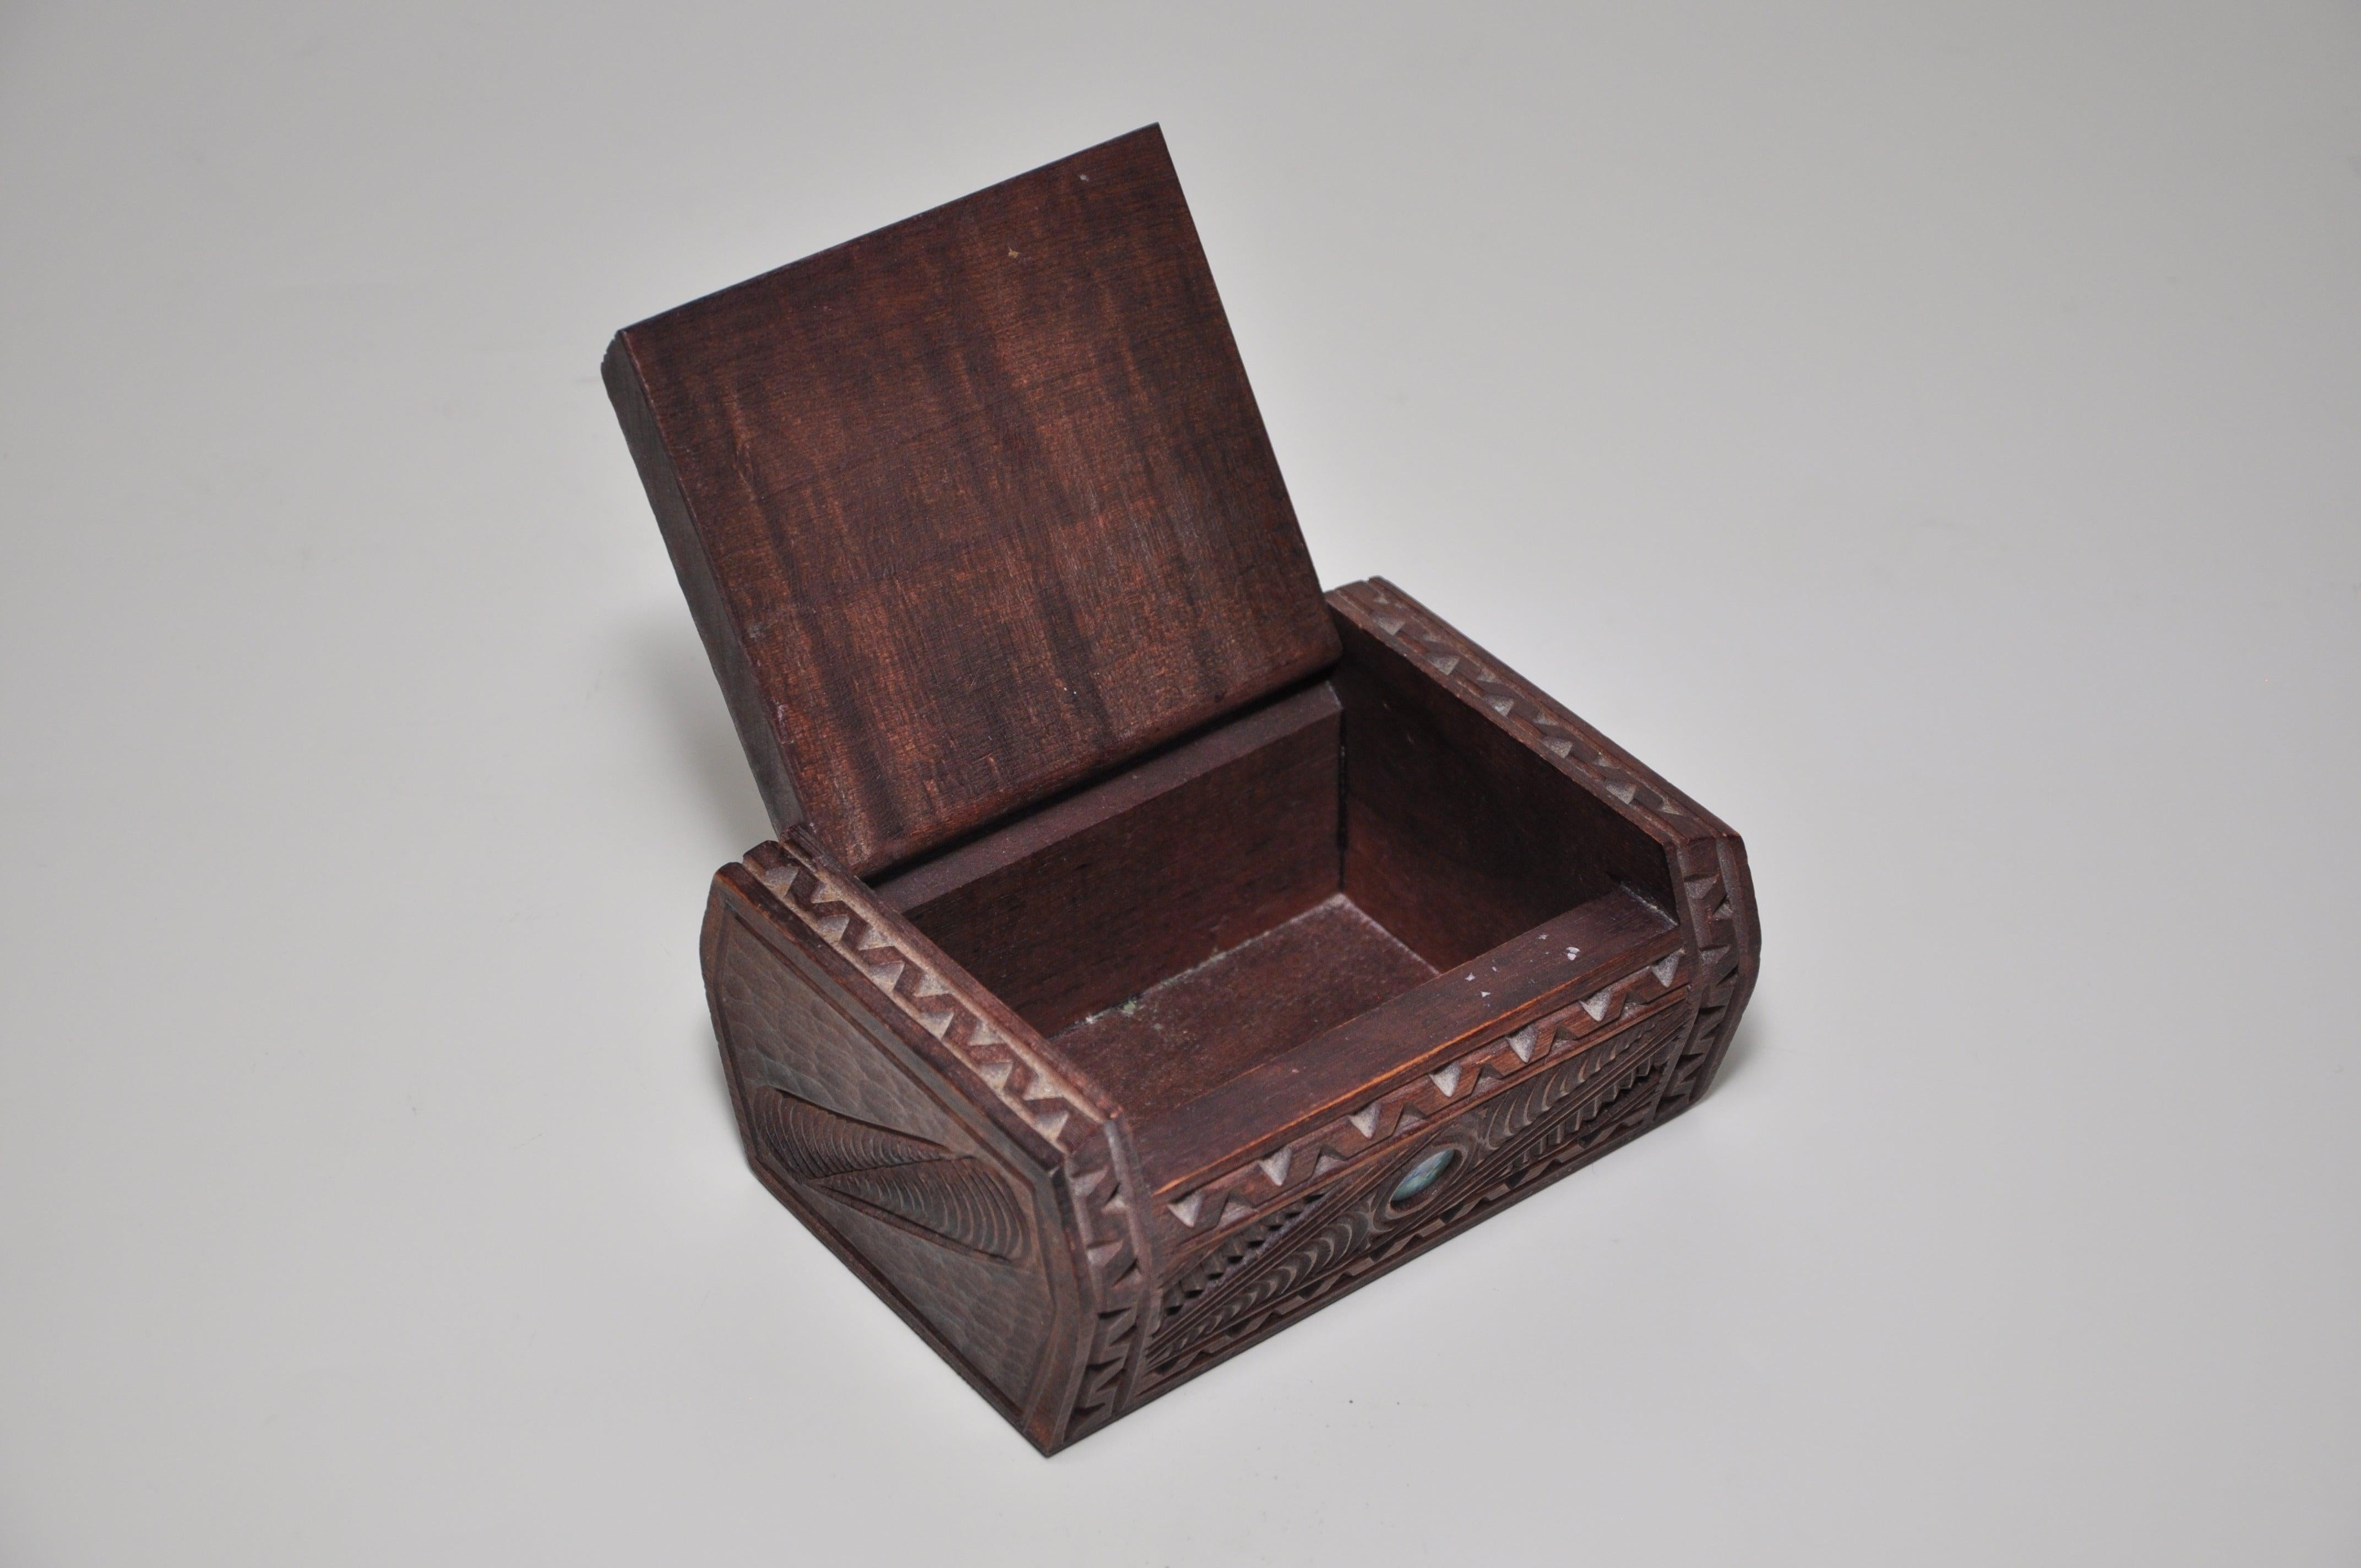 Vintage hand carved shell eyes wooden box, a vintage hand carved and inlaid dark wooden trinket or jewelry box decorated with a Maori tribal face and inlaid paua shell ‘eyes’ on the pin-hinged lid, with other incised motifs to the sides. This is an